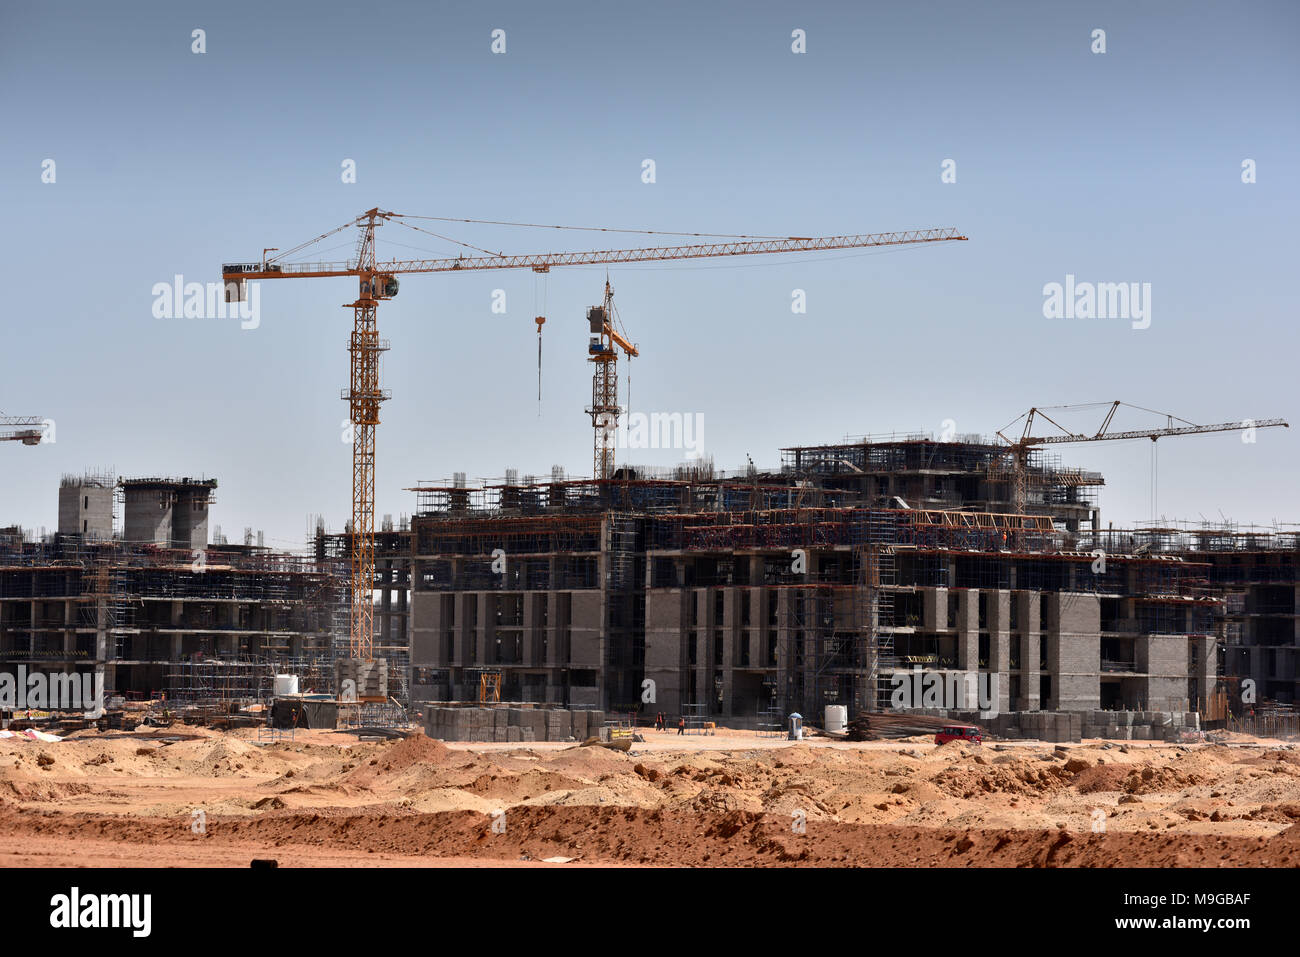 ministries-under-construction-in-the-future-government-quarter-of-the-new-administrative-capital-capital-cairo-pictured-on-13-march-2018-the-construction-of-a-new-capital-of-egypt-is-a-mega-project-announced-by-president-abdel-fattah-el-sisi-at-an-economic-summit-in-2015-it-is-to-be-built-at-a-distance-of-about-60-km-from-the-old-capital-cairo-in-the-direction-of-the-red-sea-coast-on-an-area-of-more-than-700-square-kilometers-the-first-agencies-ministries-banks-and-offices-are-to-move-as-early-as-2019-and-start-their-work-in-the-new-administrative-metropolis-capital-cairo-usage-worl-M9GBAF.jpg